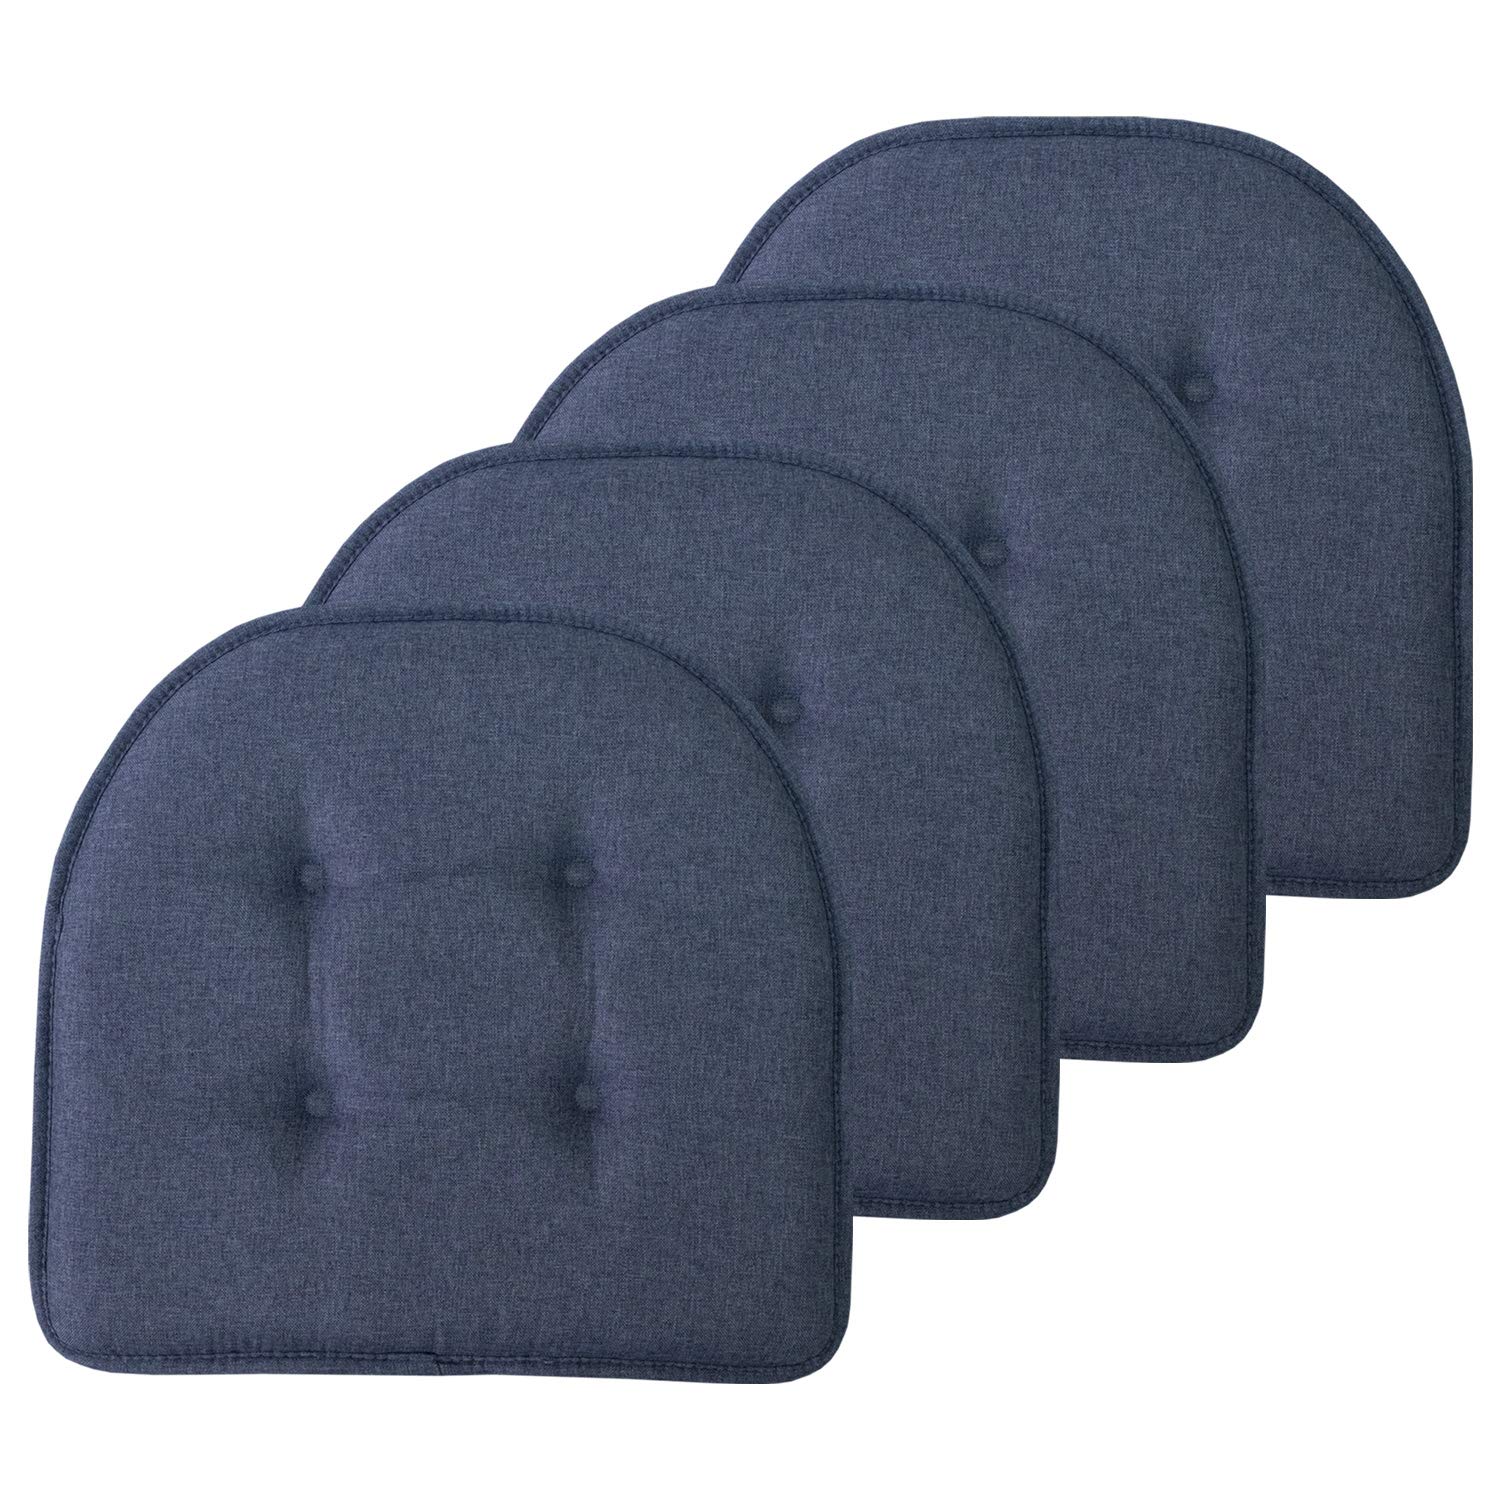 Sweet Home Collection Chair Cushion Memory Foam Pads Tufted Slip Non Skid Rubber Back U-Shaped 17" x 16" Seat Cover, Denim Blue